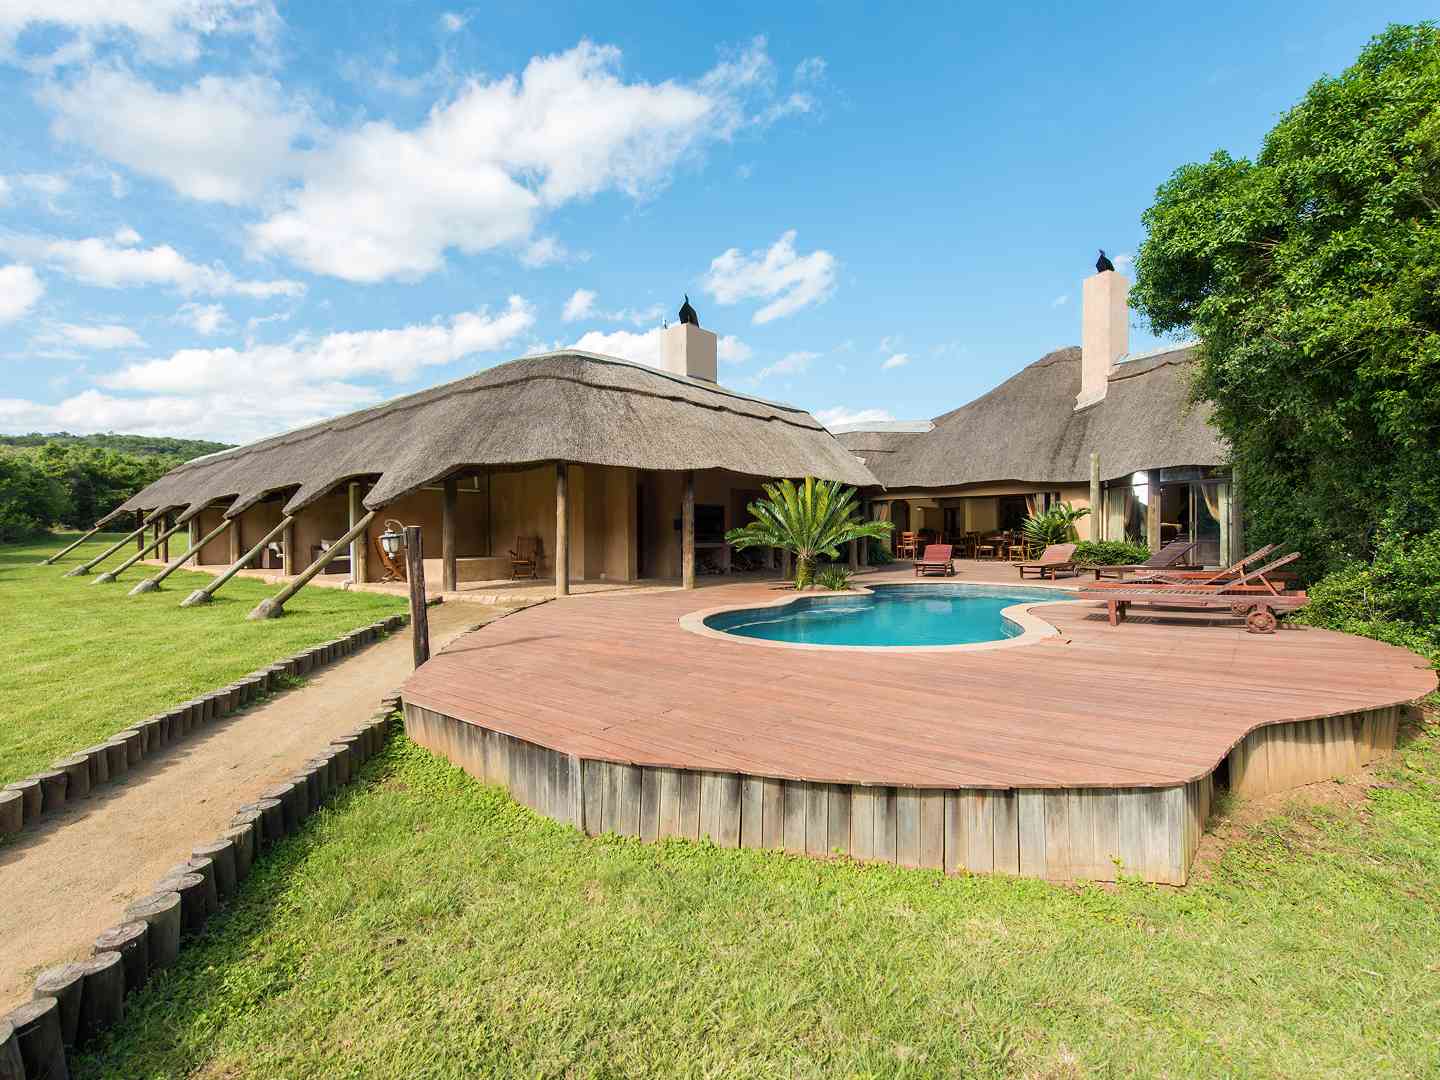 Premier Resort Mpongo Private Game Reserve, East London